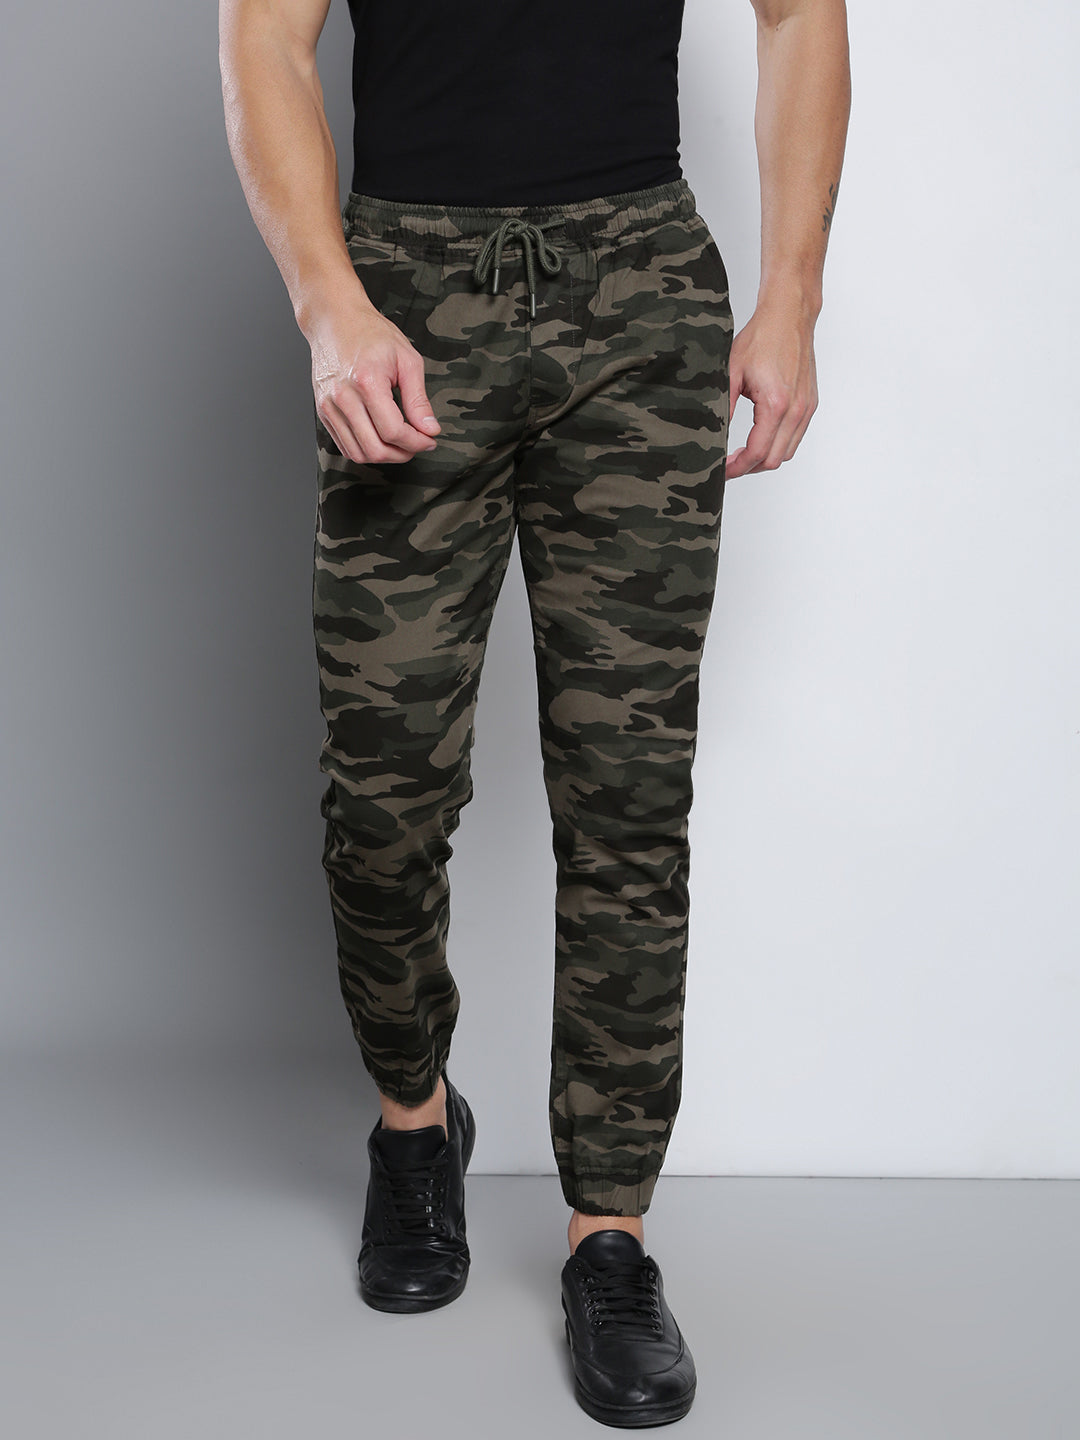 10 Styling Tips To Look Best In Cargo Pants & How To Style For Men